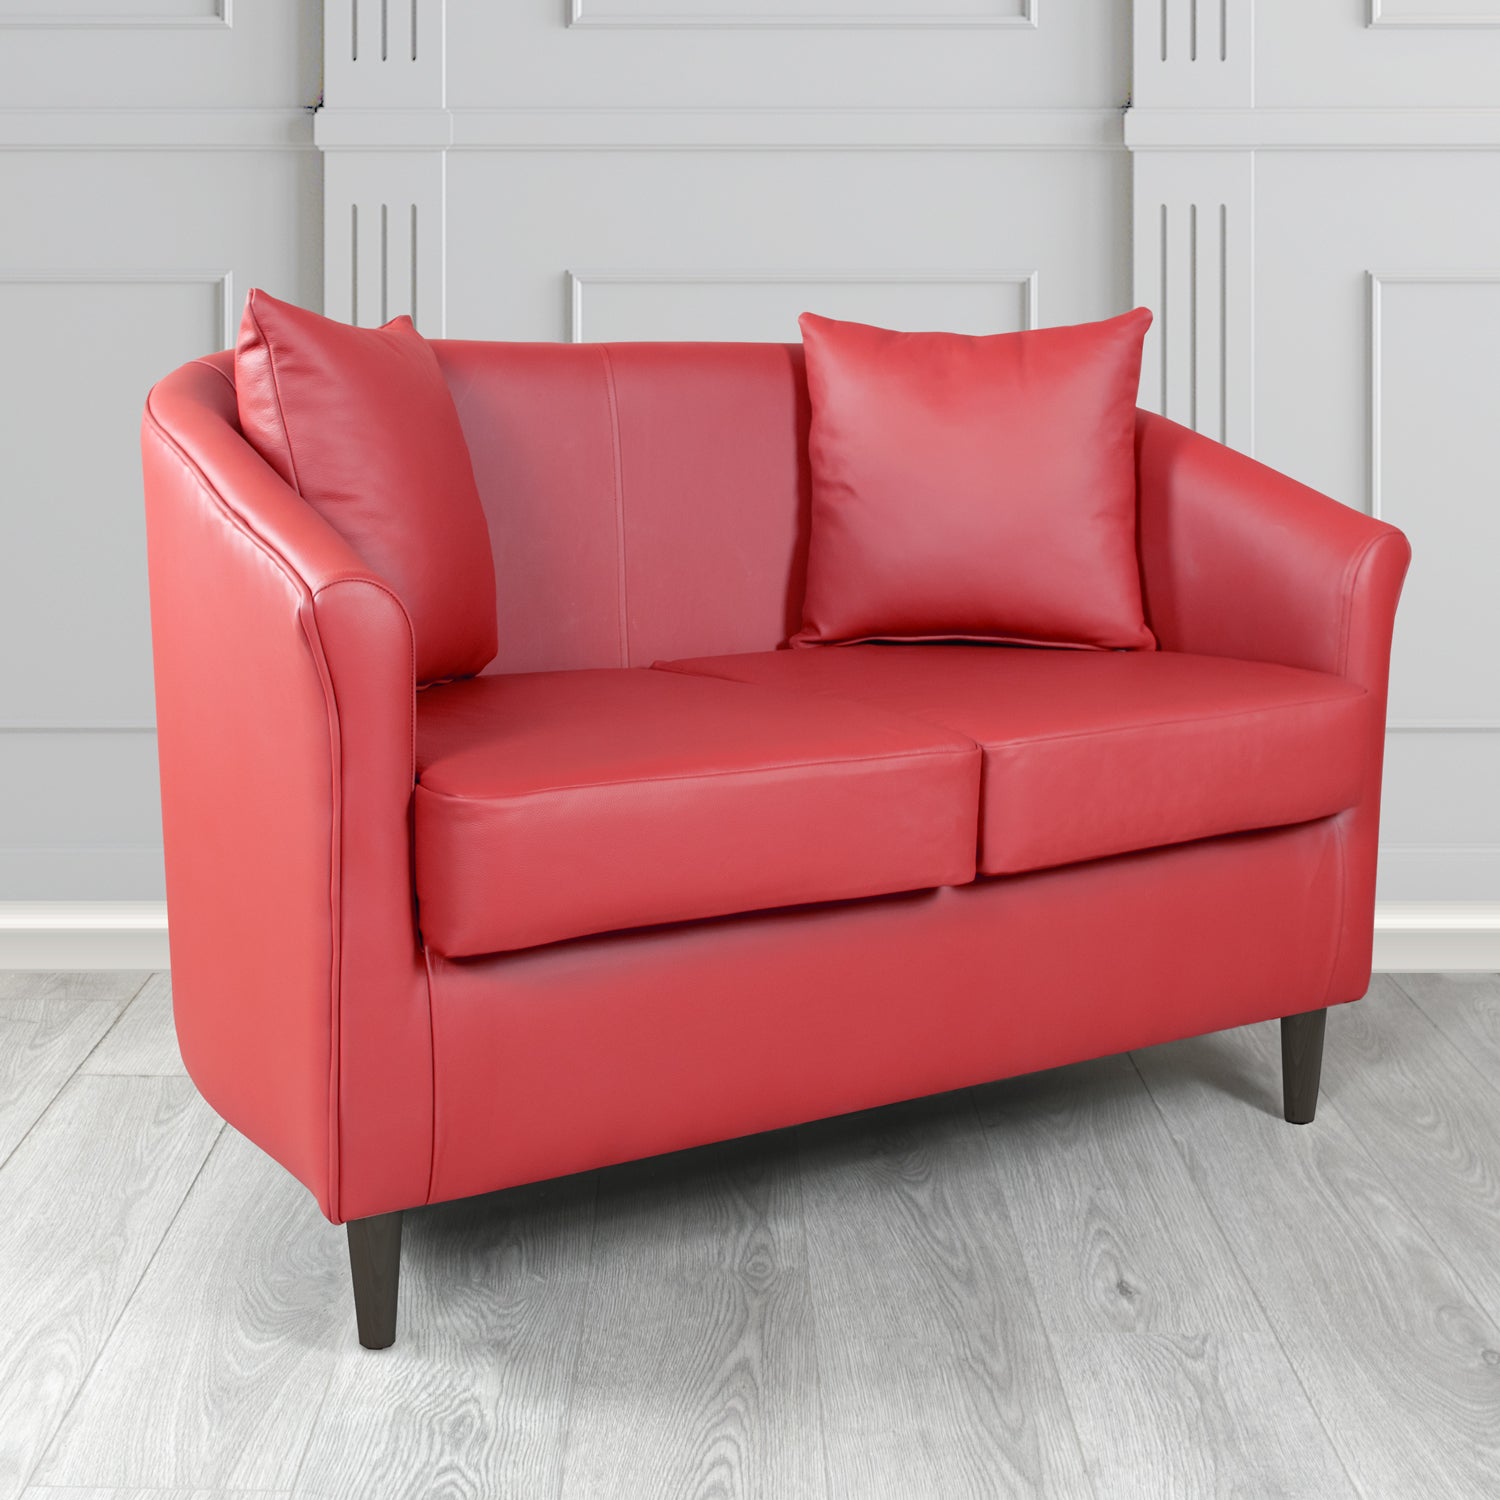 St Tropez Shelly Velvet Red Crib 5 Genuine Leather 2 Seater Tub Sofa with Scatter Cushions - The Tub Chair Shop